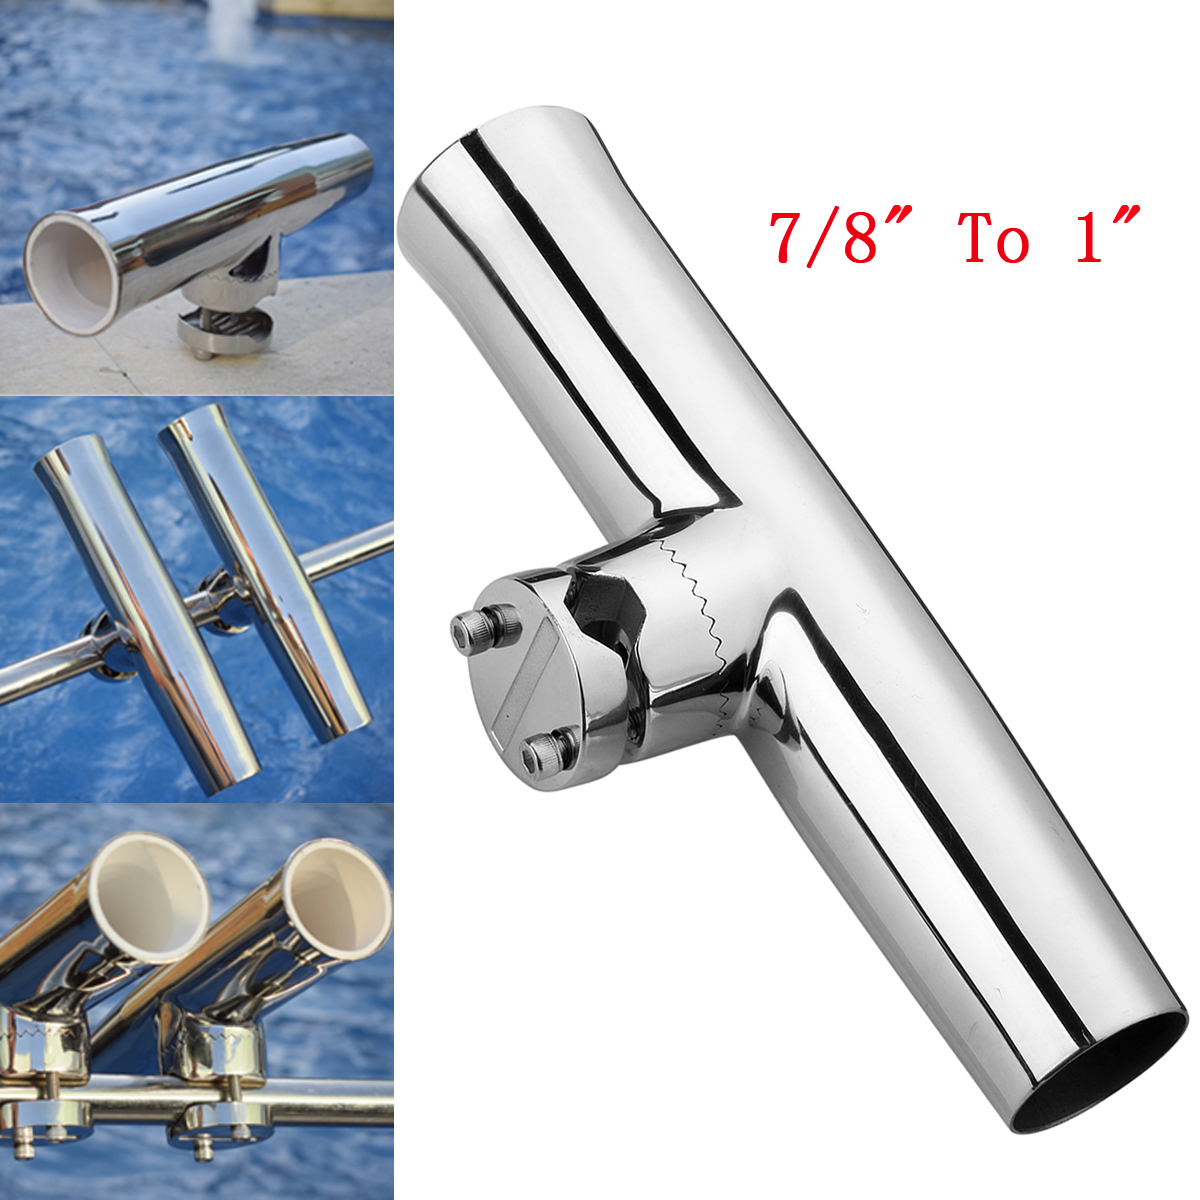 316-Stainless-Steel-78-1-Tube-Fishing-Rod-Holder-Boat-Tackle-Clamp-On-Rail-Mount-1283705-4